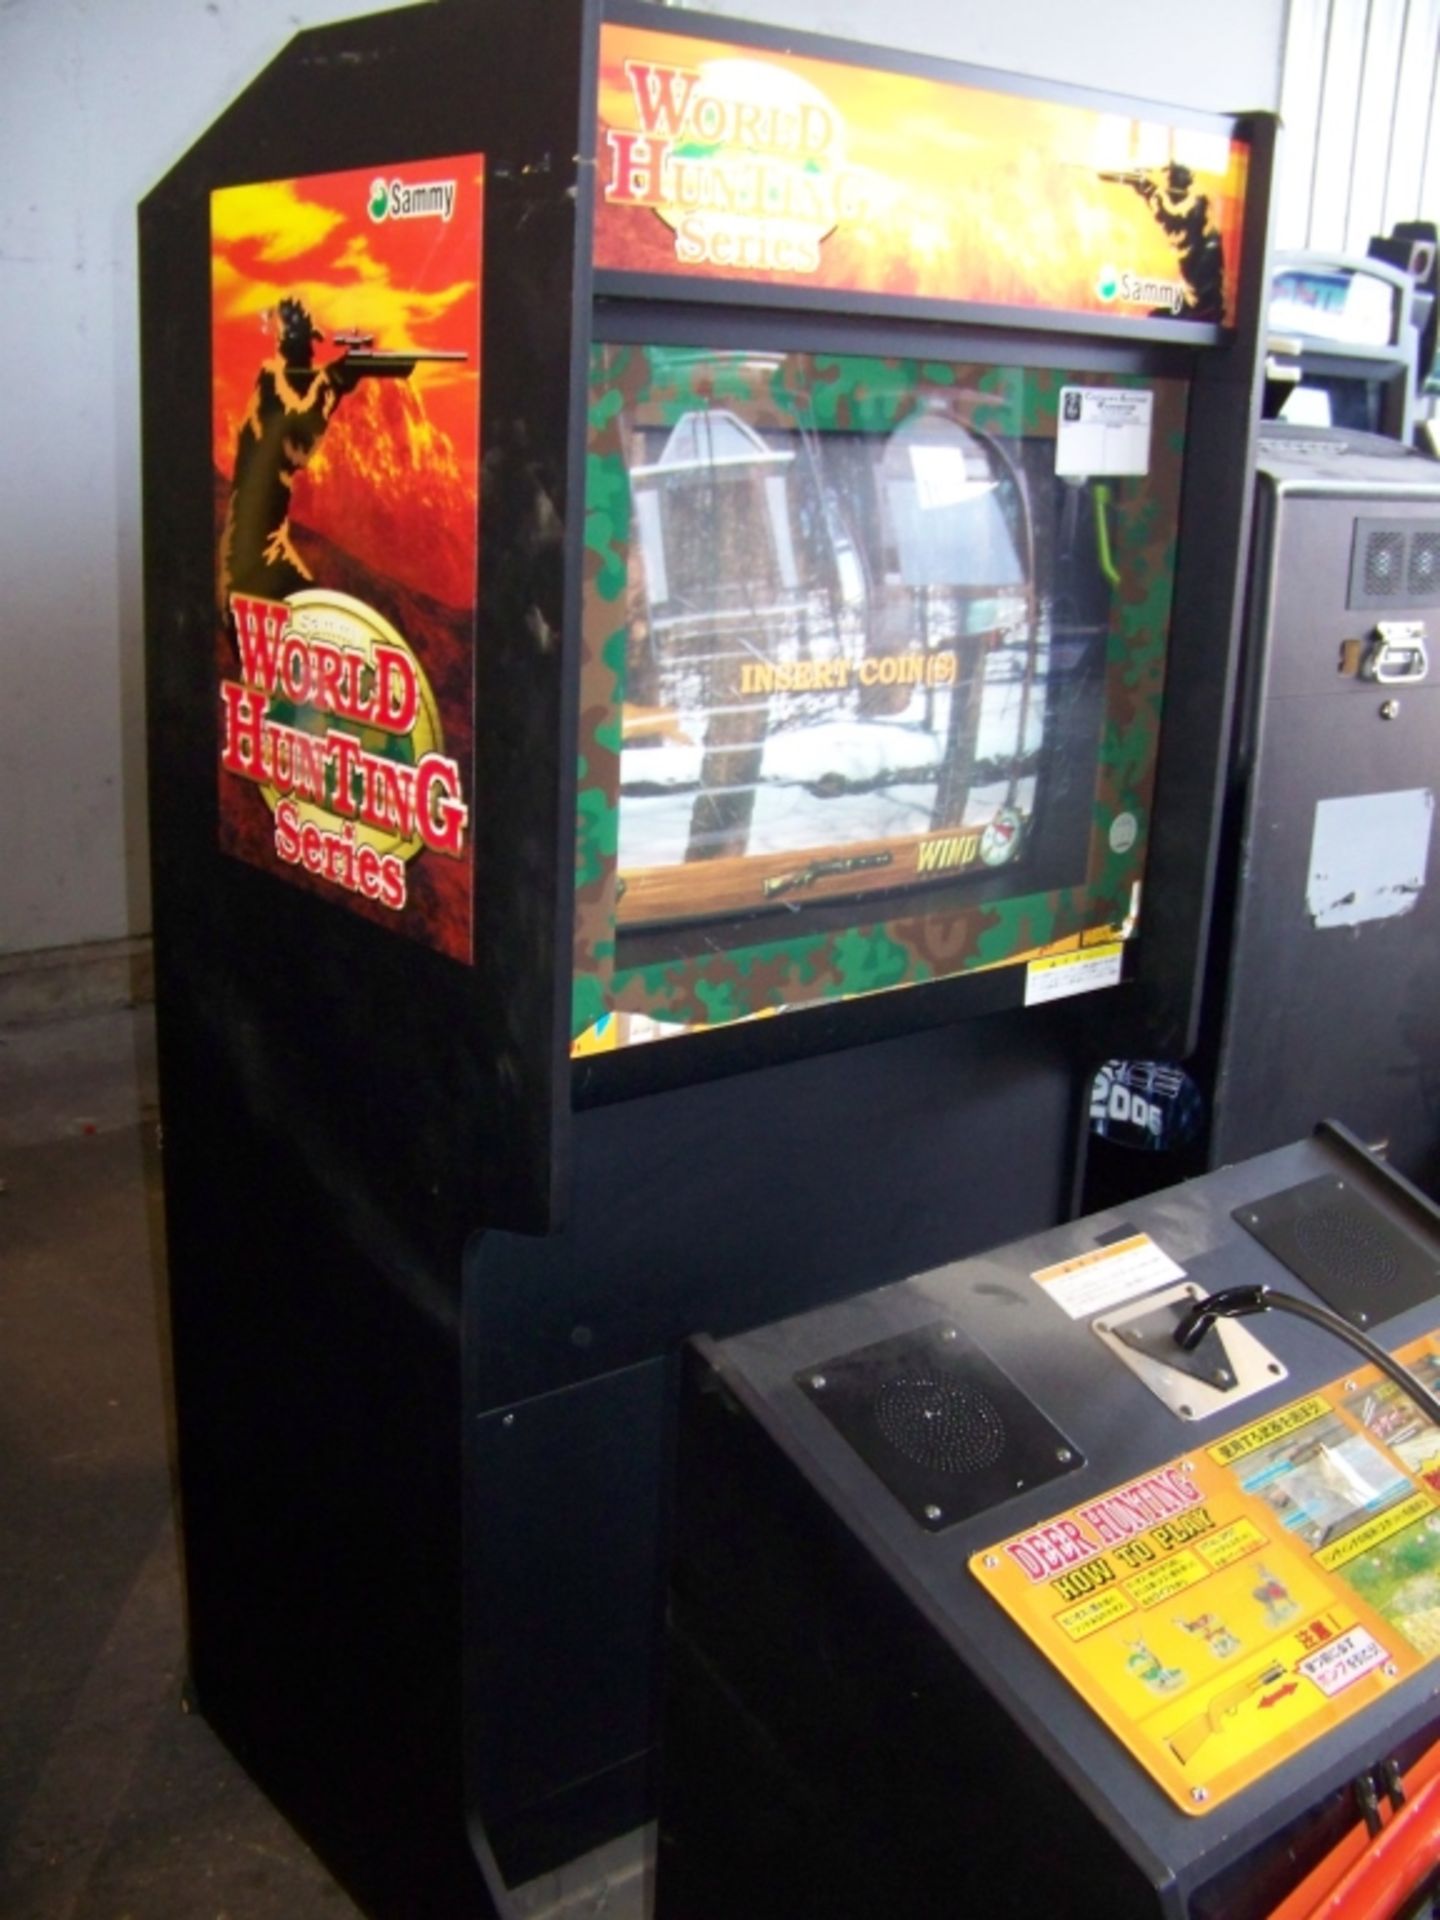 WORLD HUNTING SERIES SHOOTER ARCADE GAME SAMMY JP Item is in used condition. Evidence of wear and - Image 2 of 4